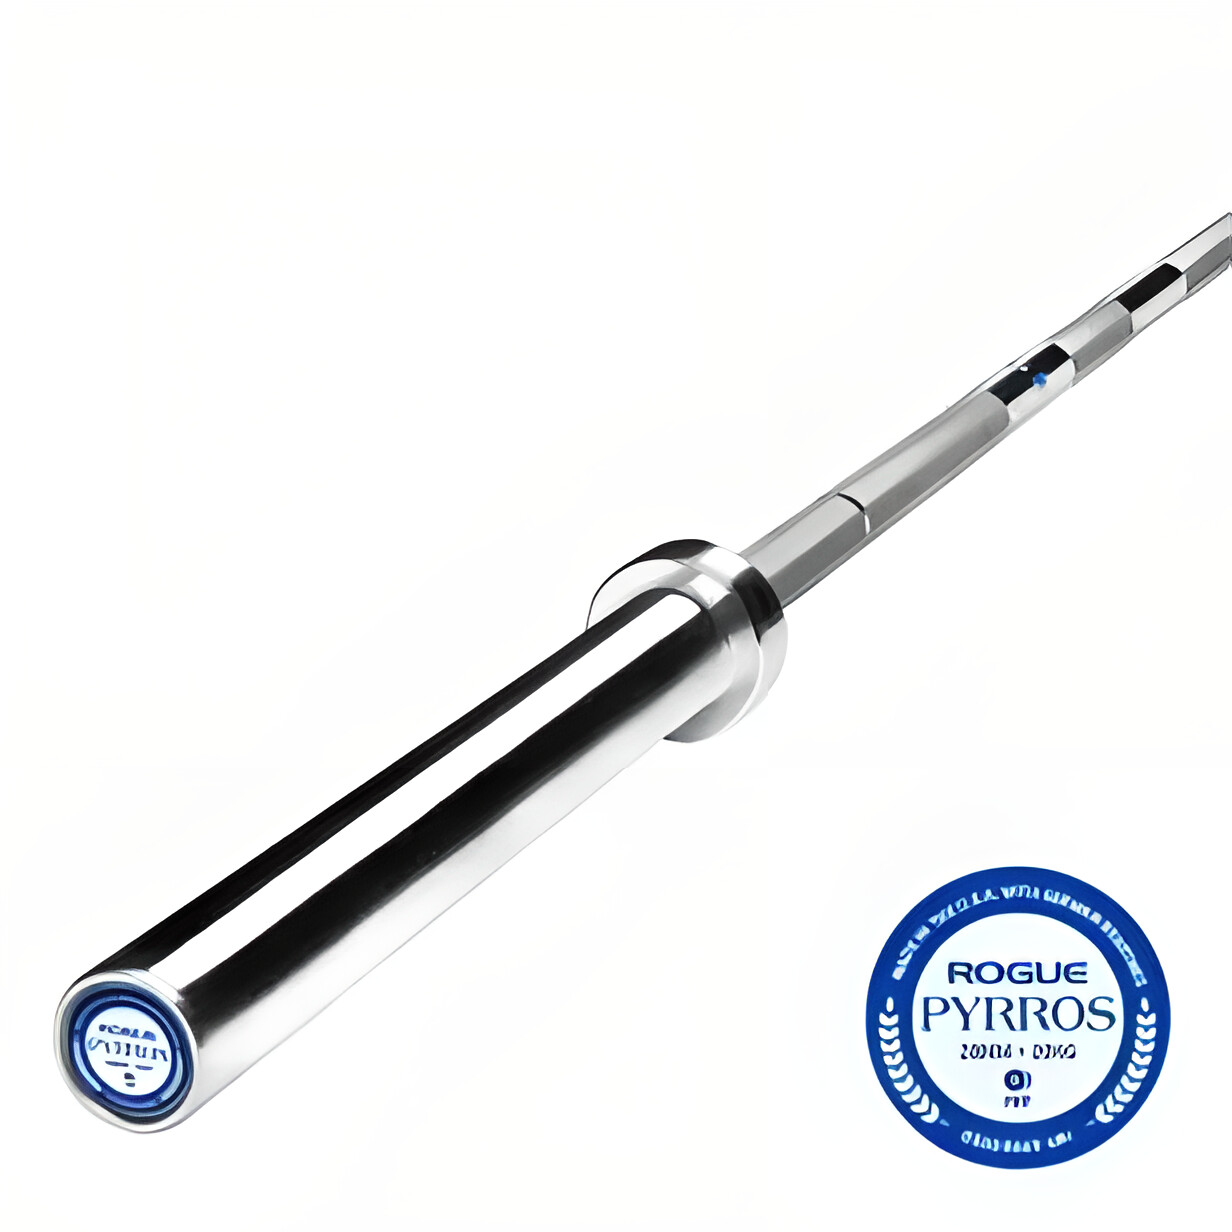 Rogue Stainless Steel Pyrros Bar